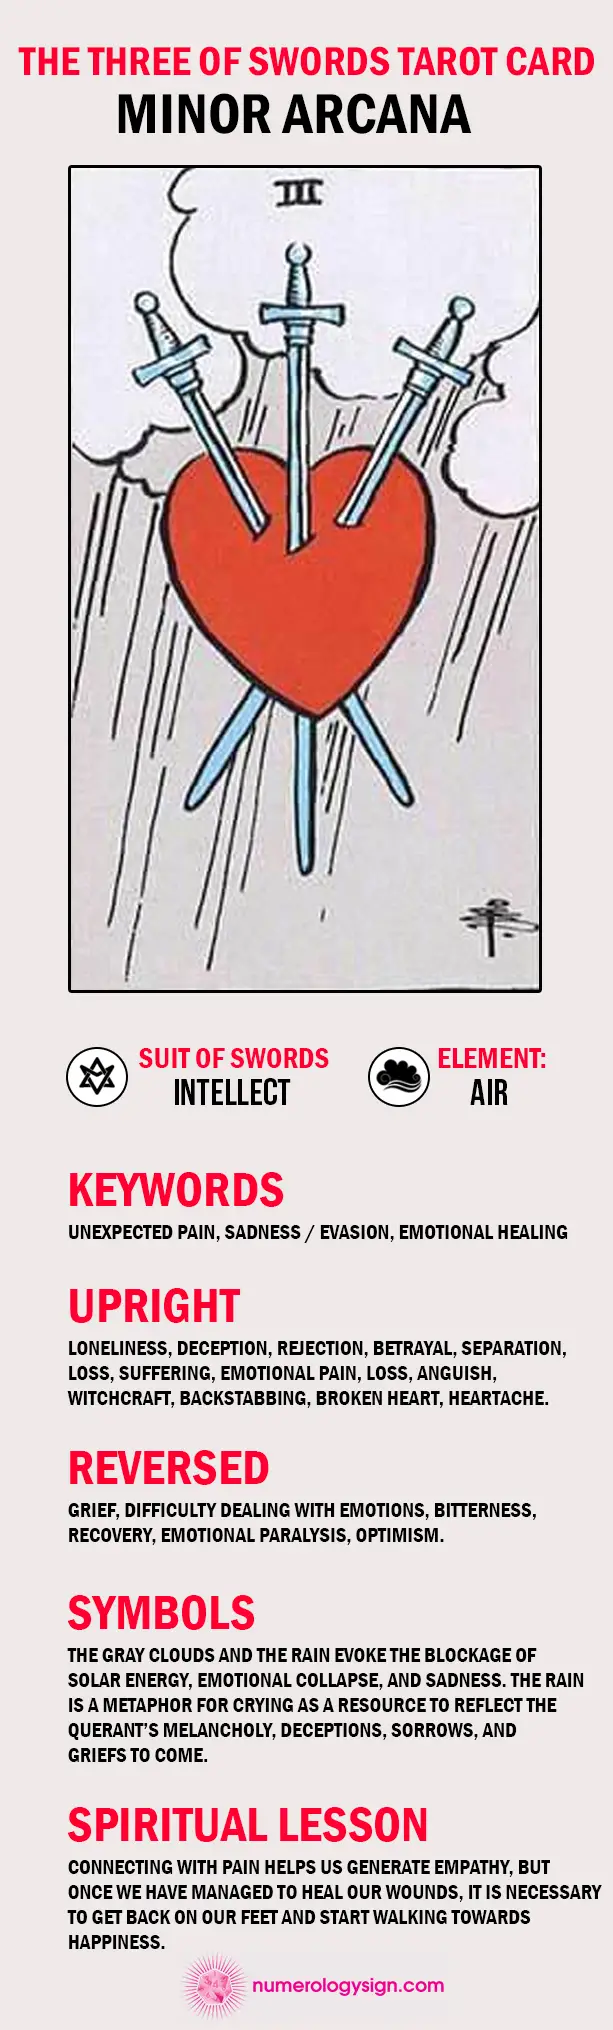 The Three of Swords Tarot Card Meaning Infographic - Minor Arcana